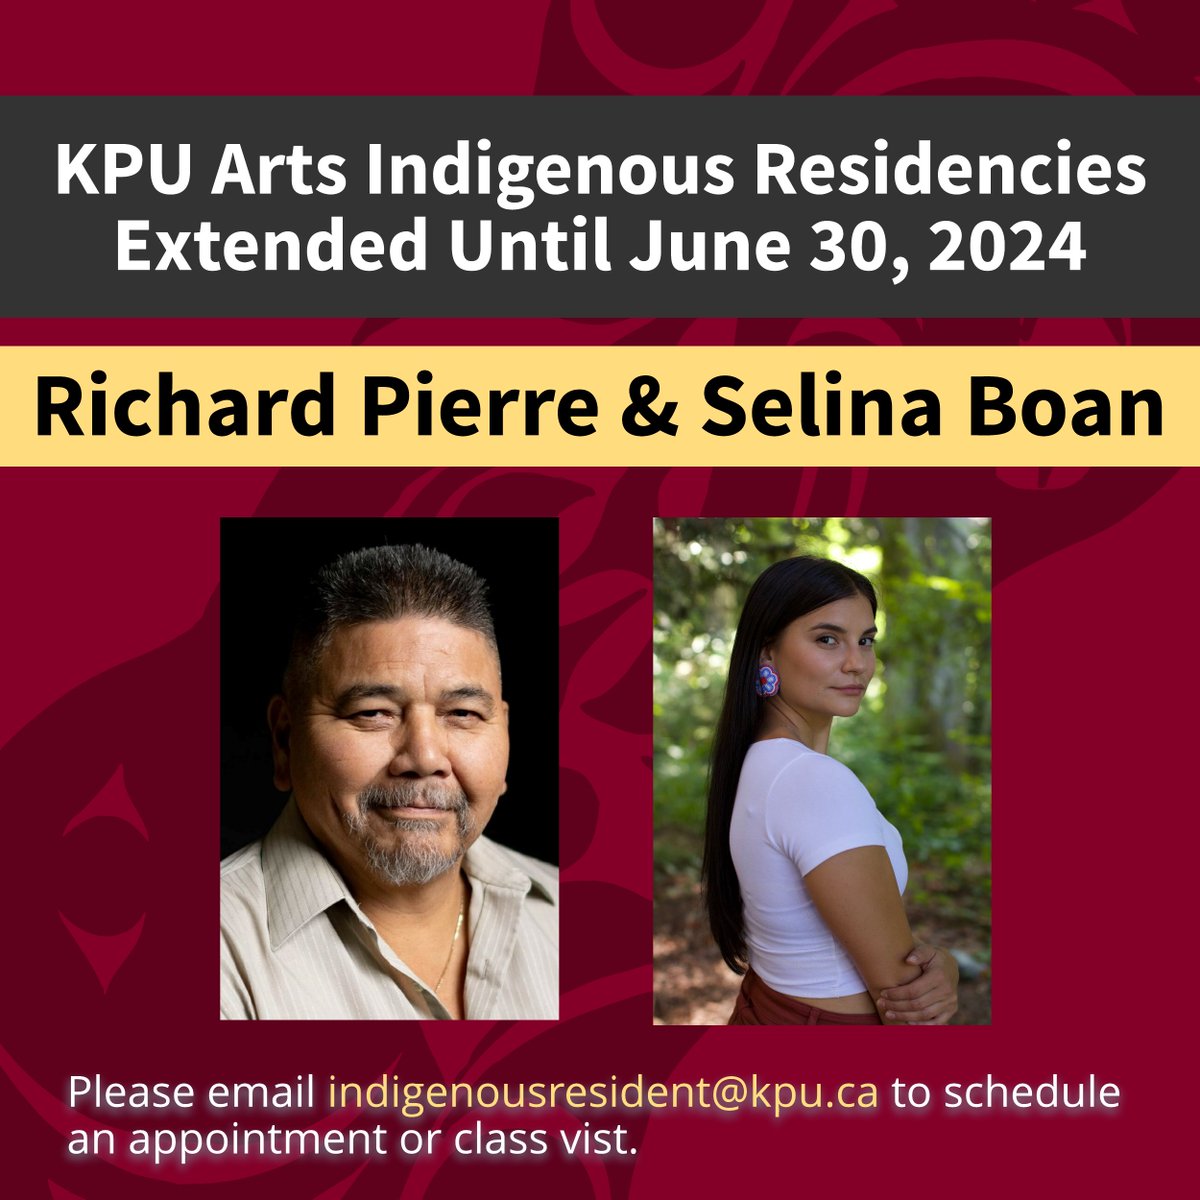 Indigenous Knowledge Keeper in Residence, Richard Pierre, and Indigenous Writer in Residence, Selina Boan have had their residencies extended until June 30, 2024! Email IndigenousResident@kpu.ca to schedule an online consultation or invite them to attend a class or event.